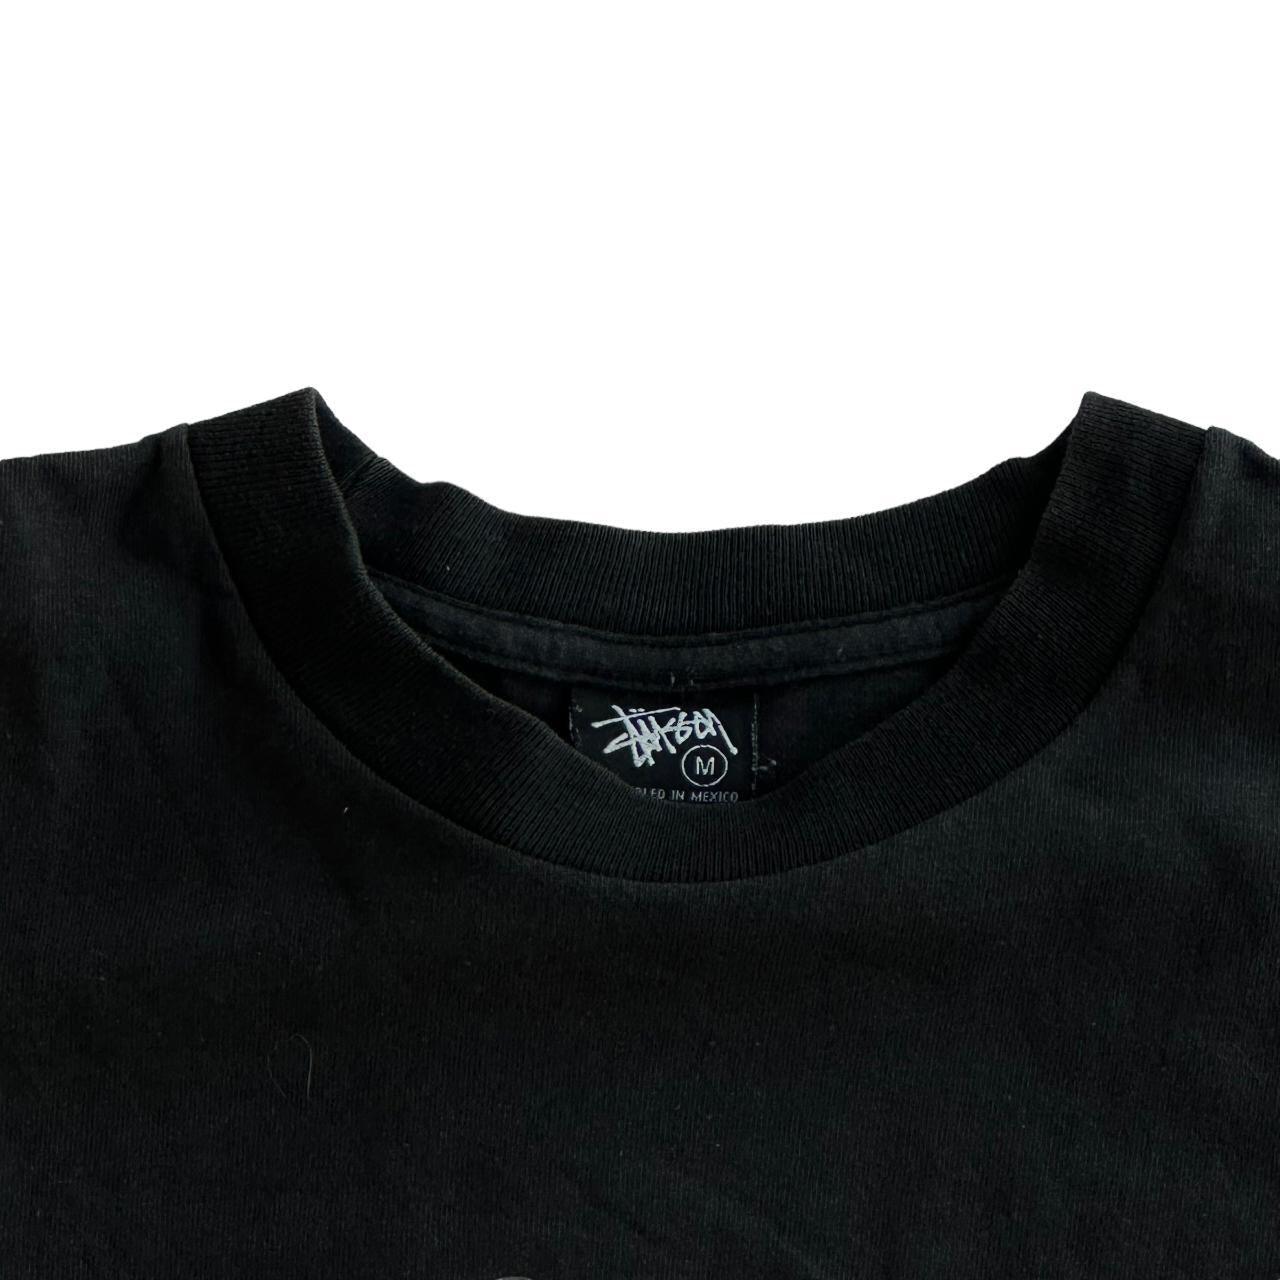 Stussy clouds Skull T-shirt short sleeve - Known Source